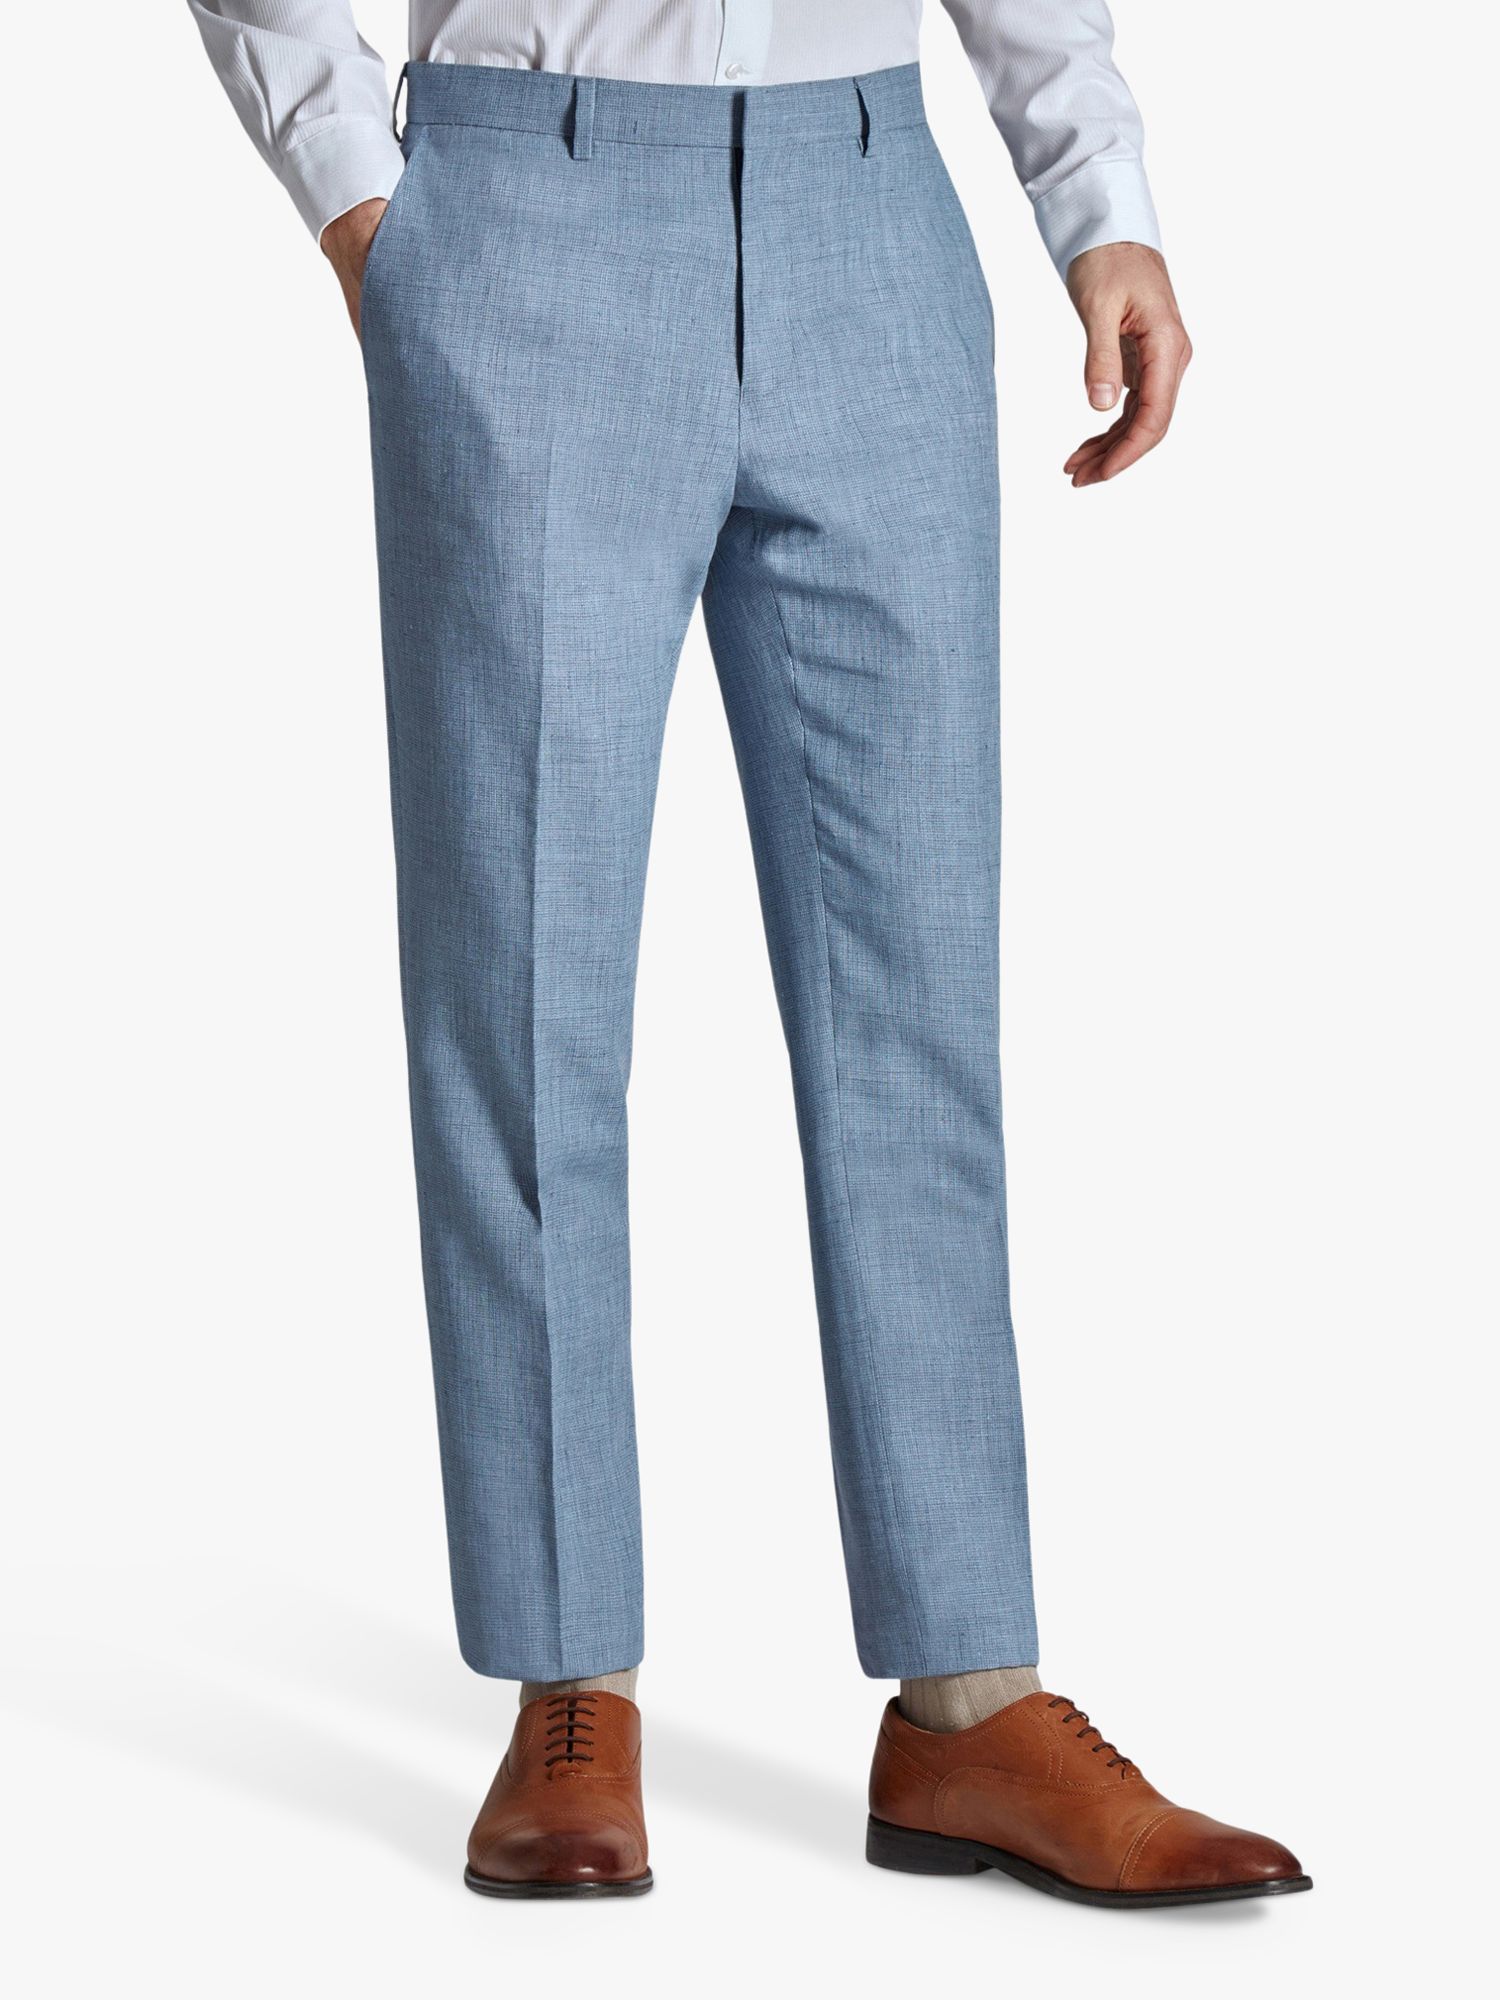 Ted Baker Hydra Linen Slim Fit Trousers, Blue, 32S